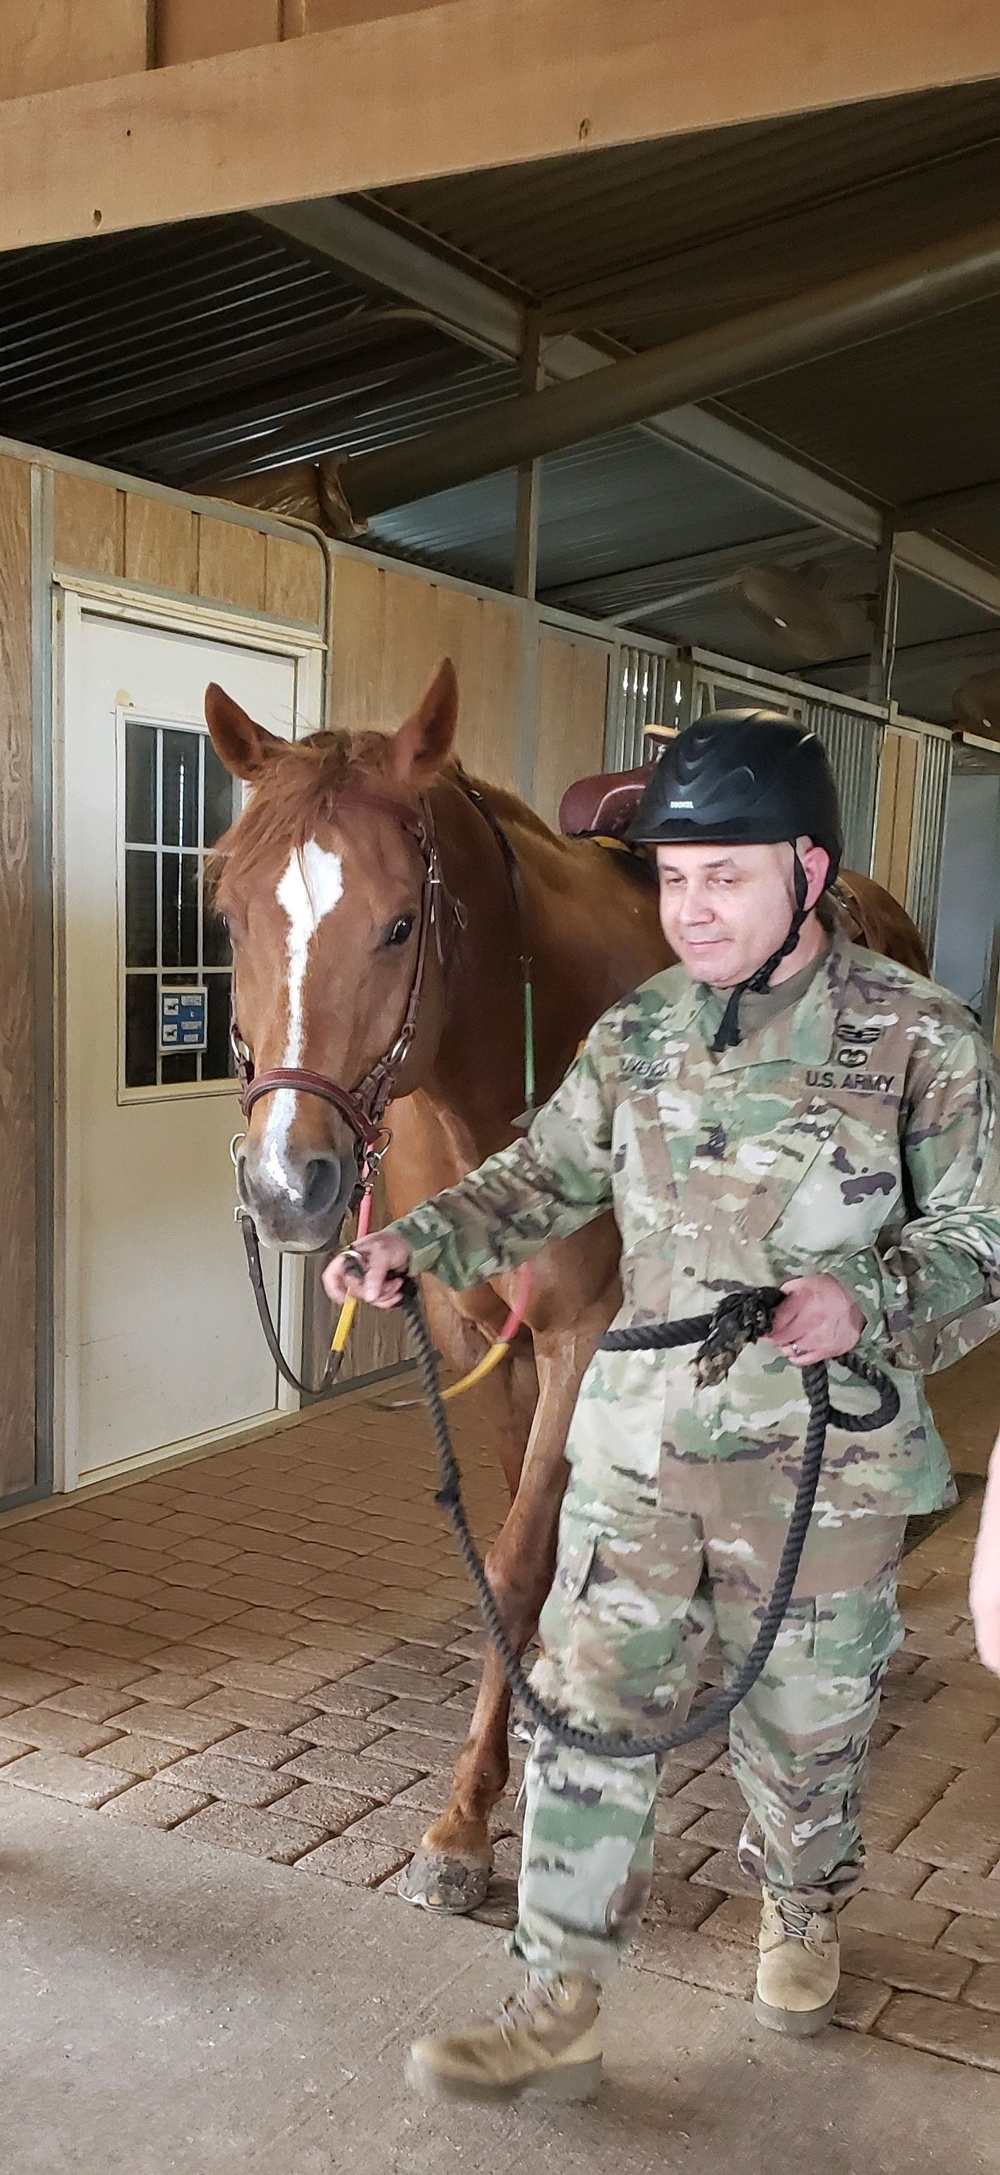 Saddle Up! Therapeutic Program Uses Horses to Help Soldiers